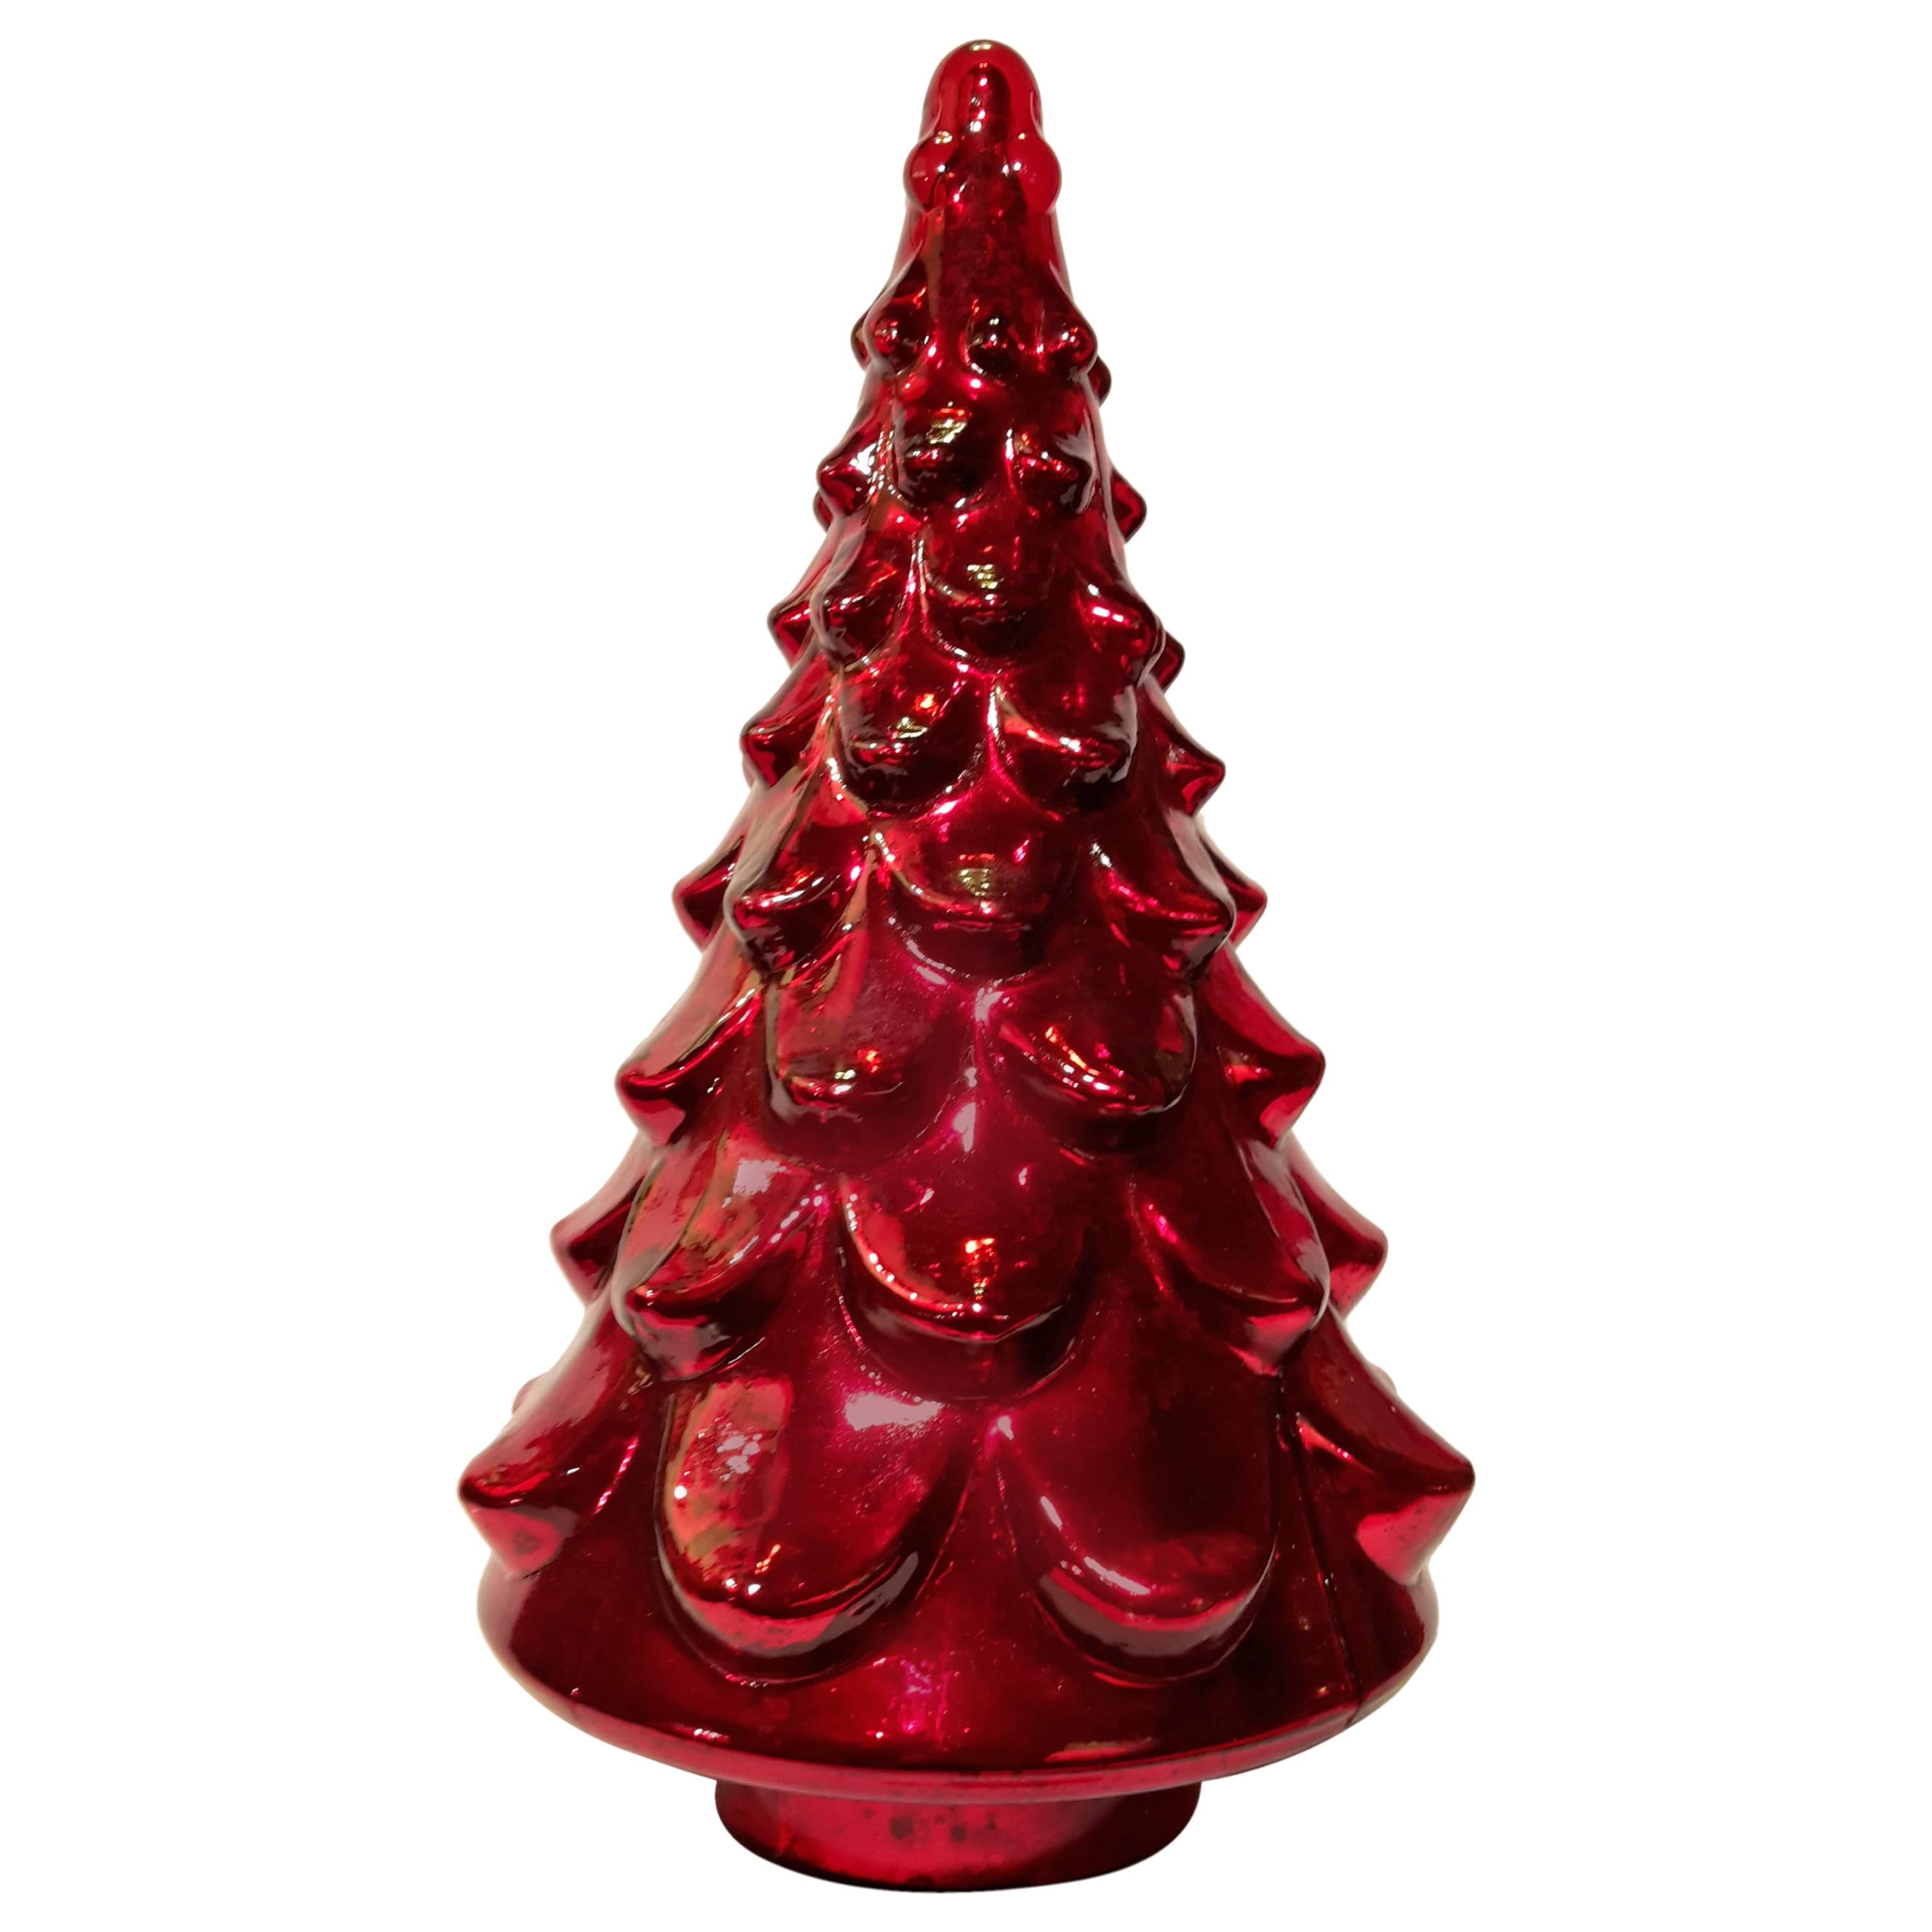 Sculpture of Christmas Tree in Red Glass For Sale